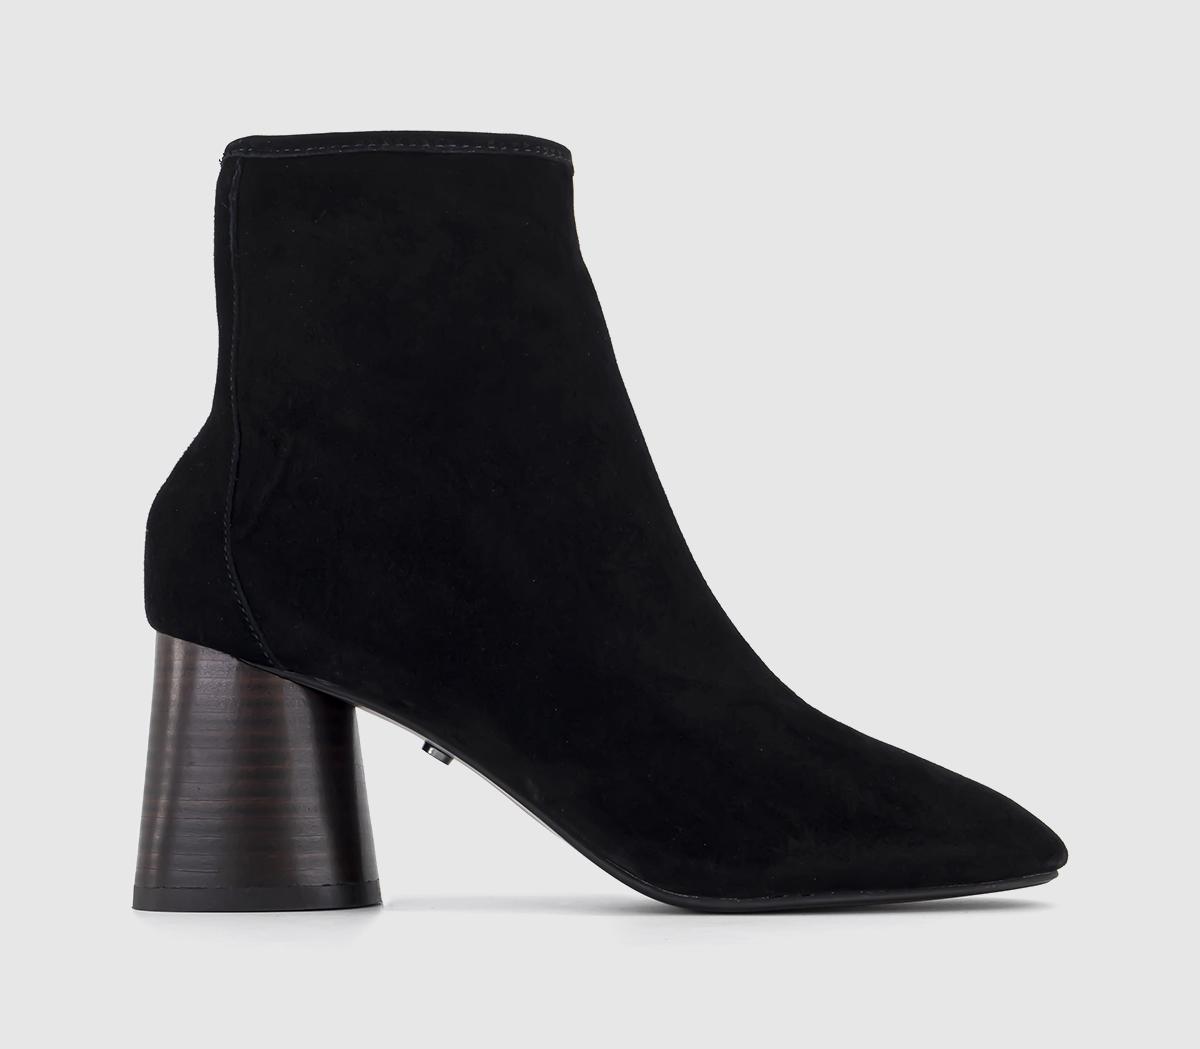 OFFICE Ash Cylinder Stacked Heel Boots Black Suede - Women's Ankle Boots